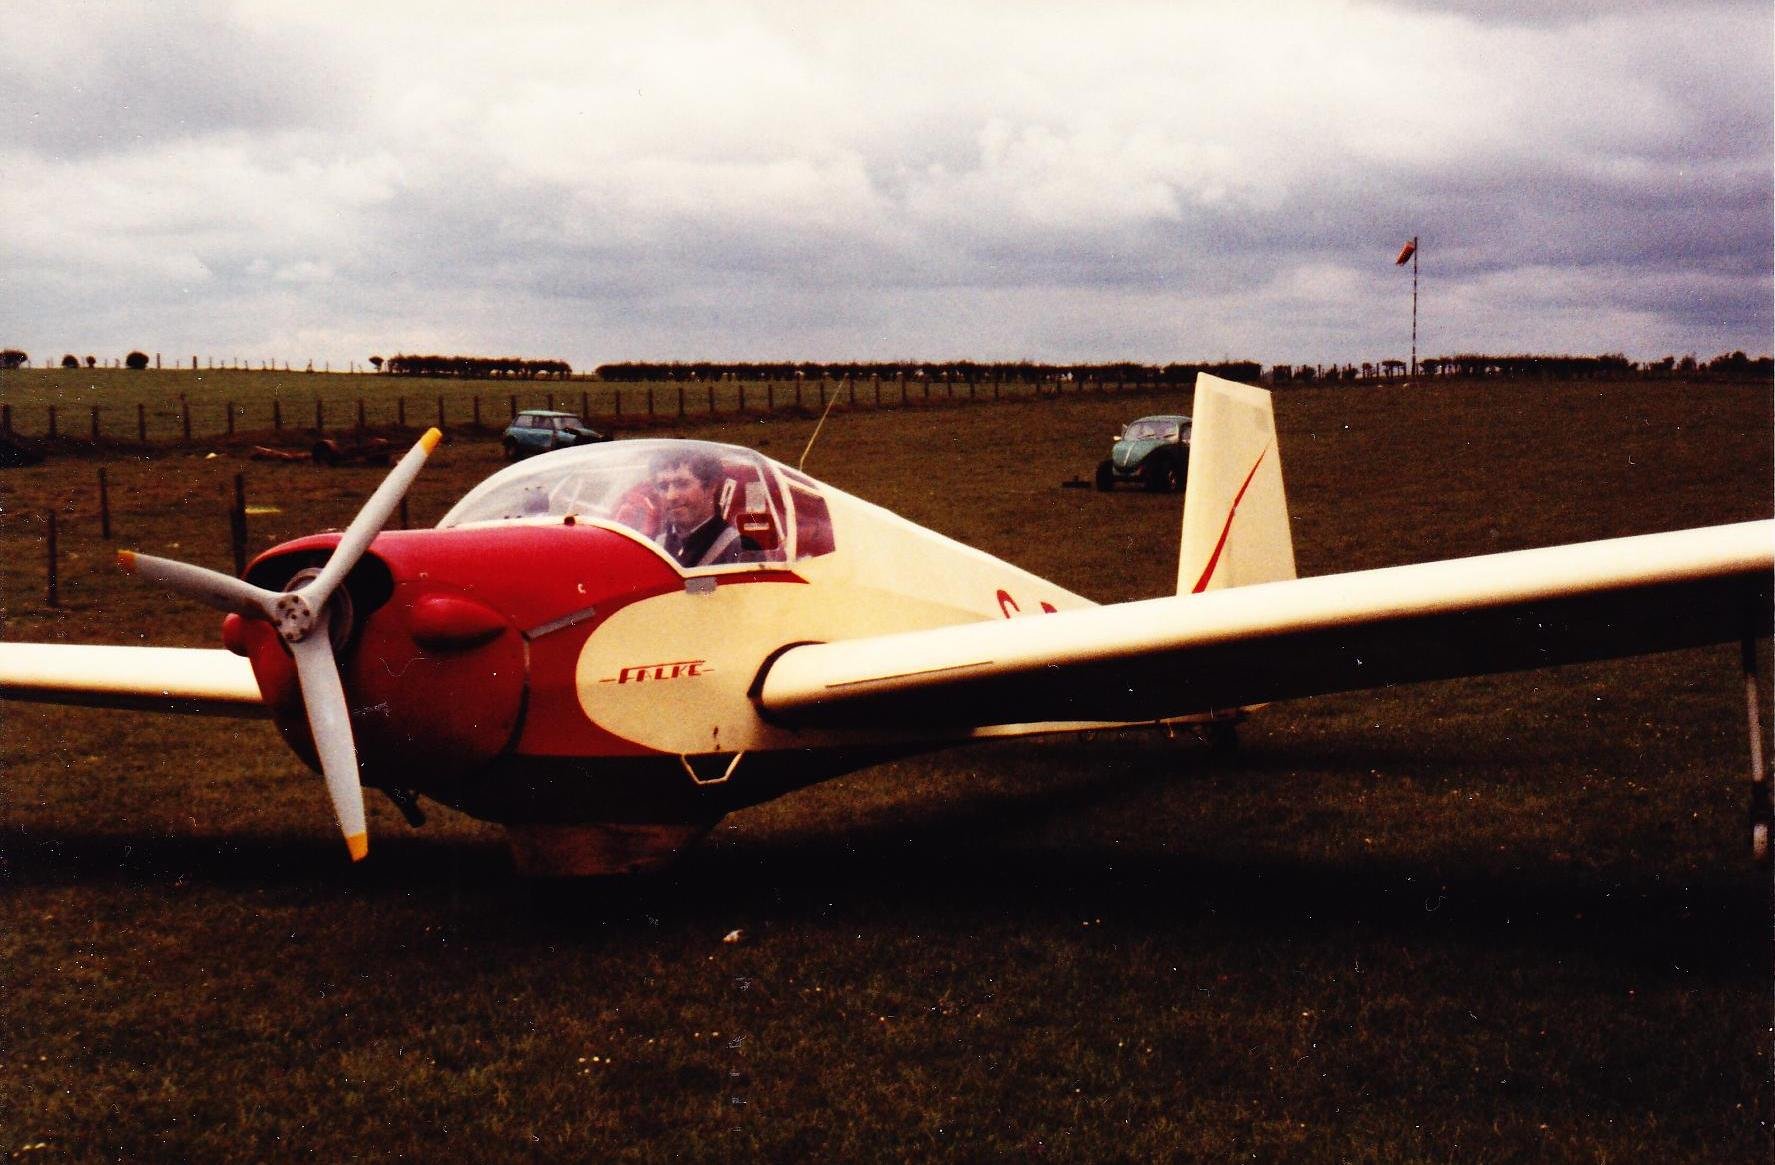 Falke motorglider at Strathaven Airfield, 1980, roughly where the new hangar is.